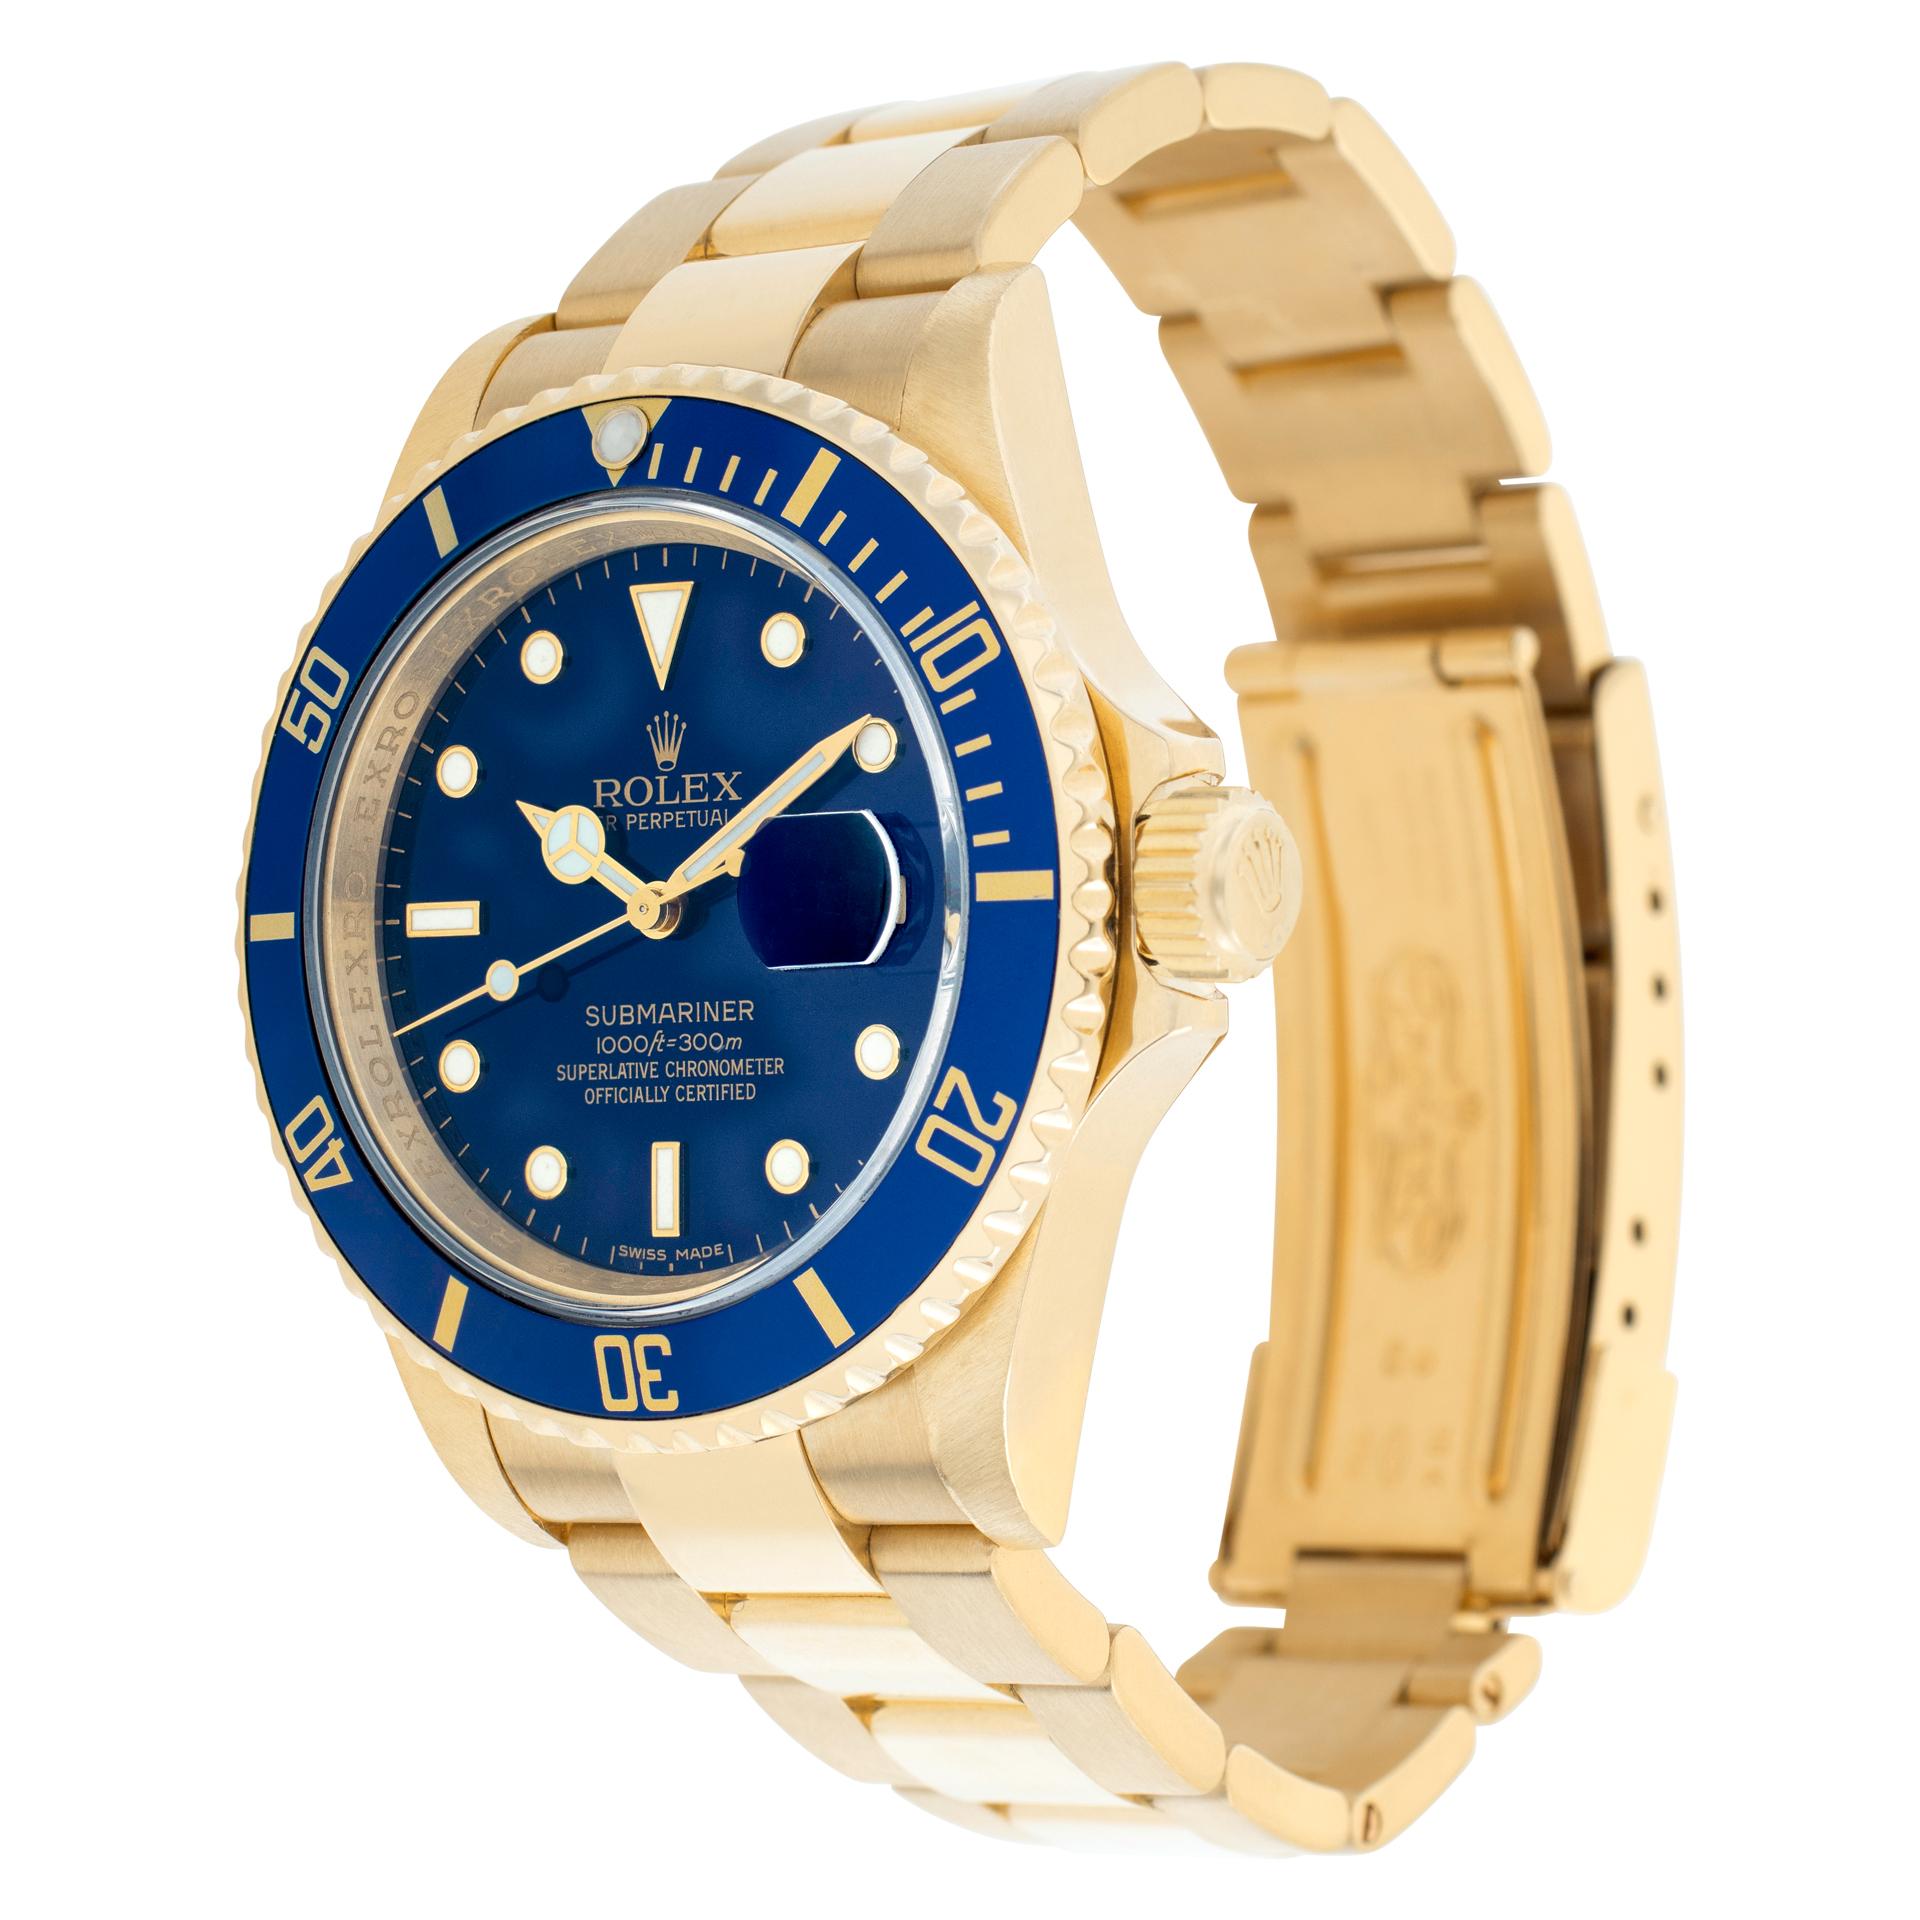 Rolex Submariner in 18k yellow gold. Auto w/ sweep seconds and date. 40 mm case size. With box and papers. **Bank wire only at this price** Ref 16618. Circa 2008. Fine Pre-owned Rolex Watch. Certified preowned Sport Rolex Submariner 16618 watch is